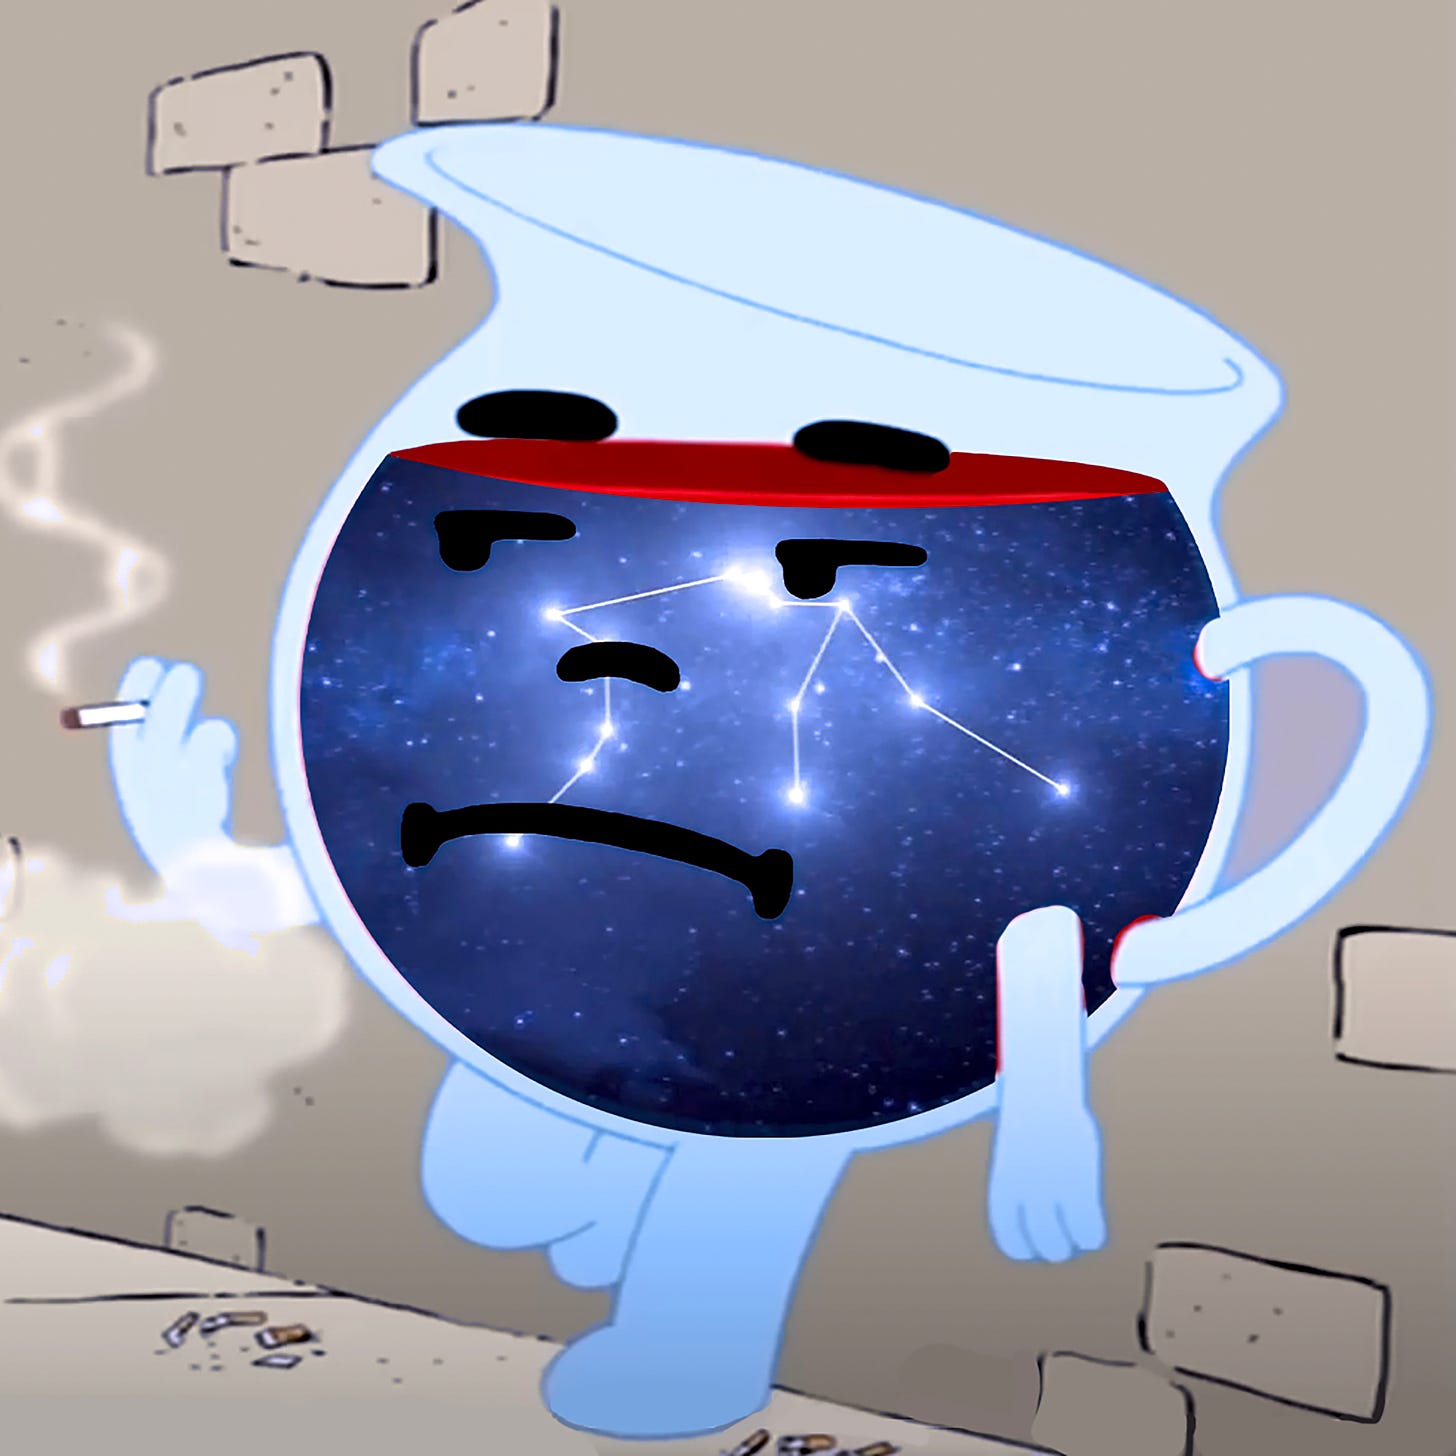 An anthropomorphic cartoon glass pitcher leans against a brick wall while smoking a cigarette. His insides show a meniscus of red liquid and his body is filled with a starry blue sky that depicts the constellation of Aquarius. His iconic smile is more of a frown in this pose and cigarette butts litter the sidewalk below his relaxed lean.